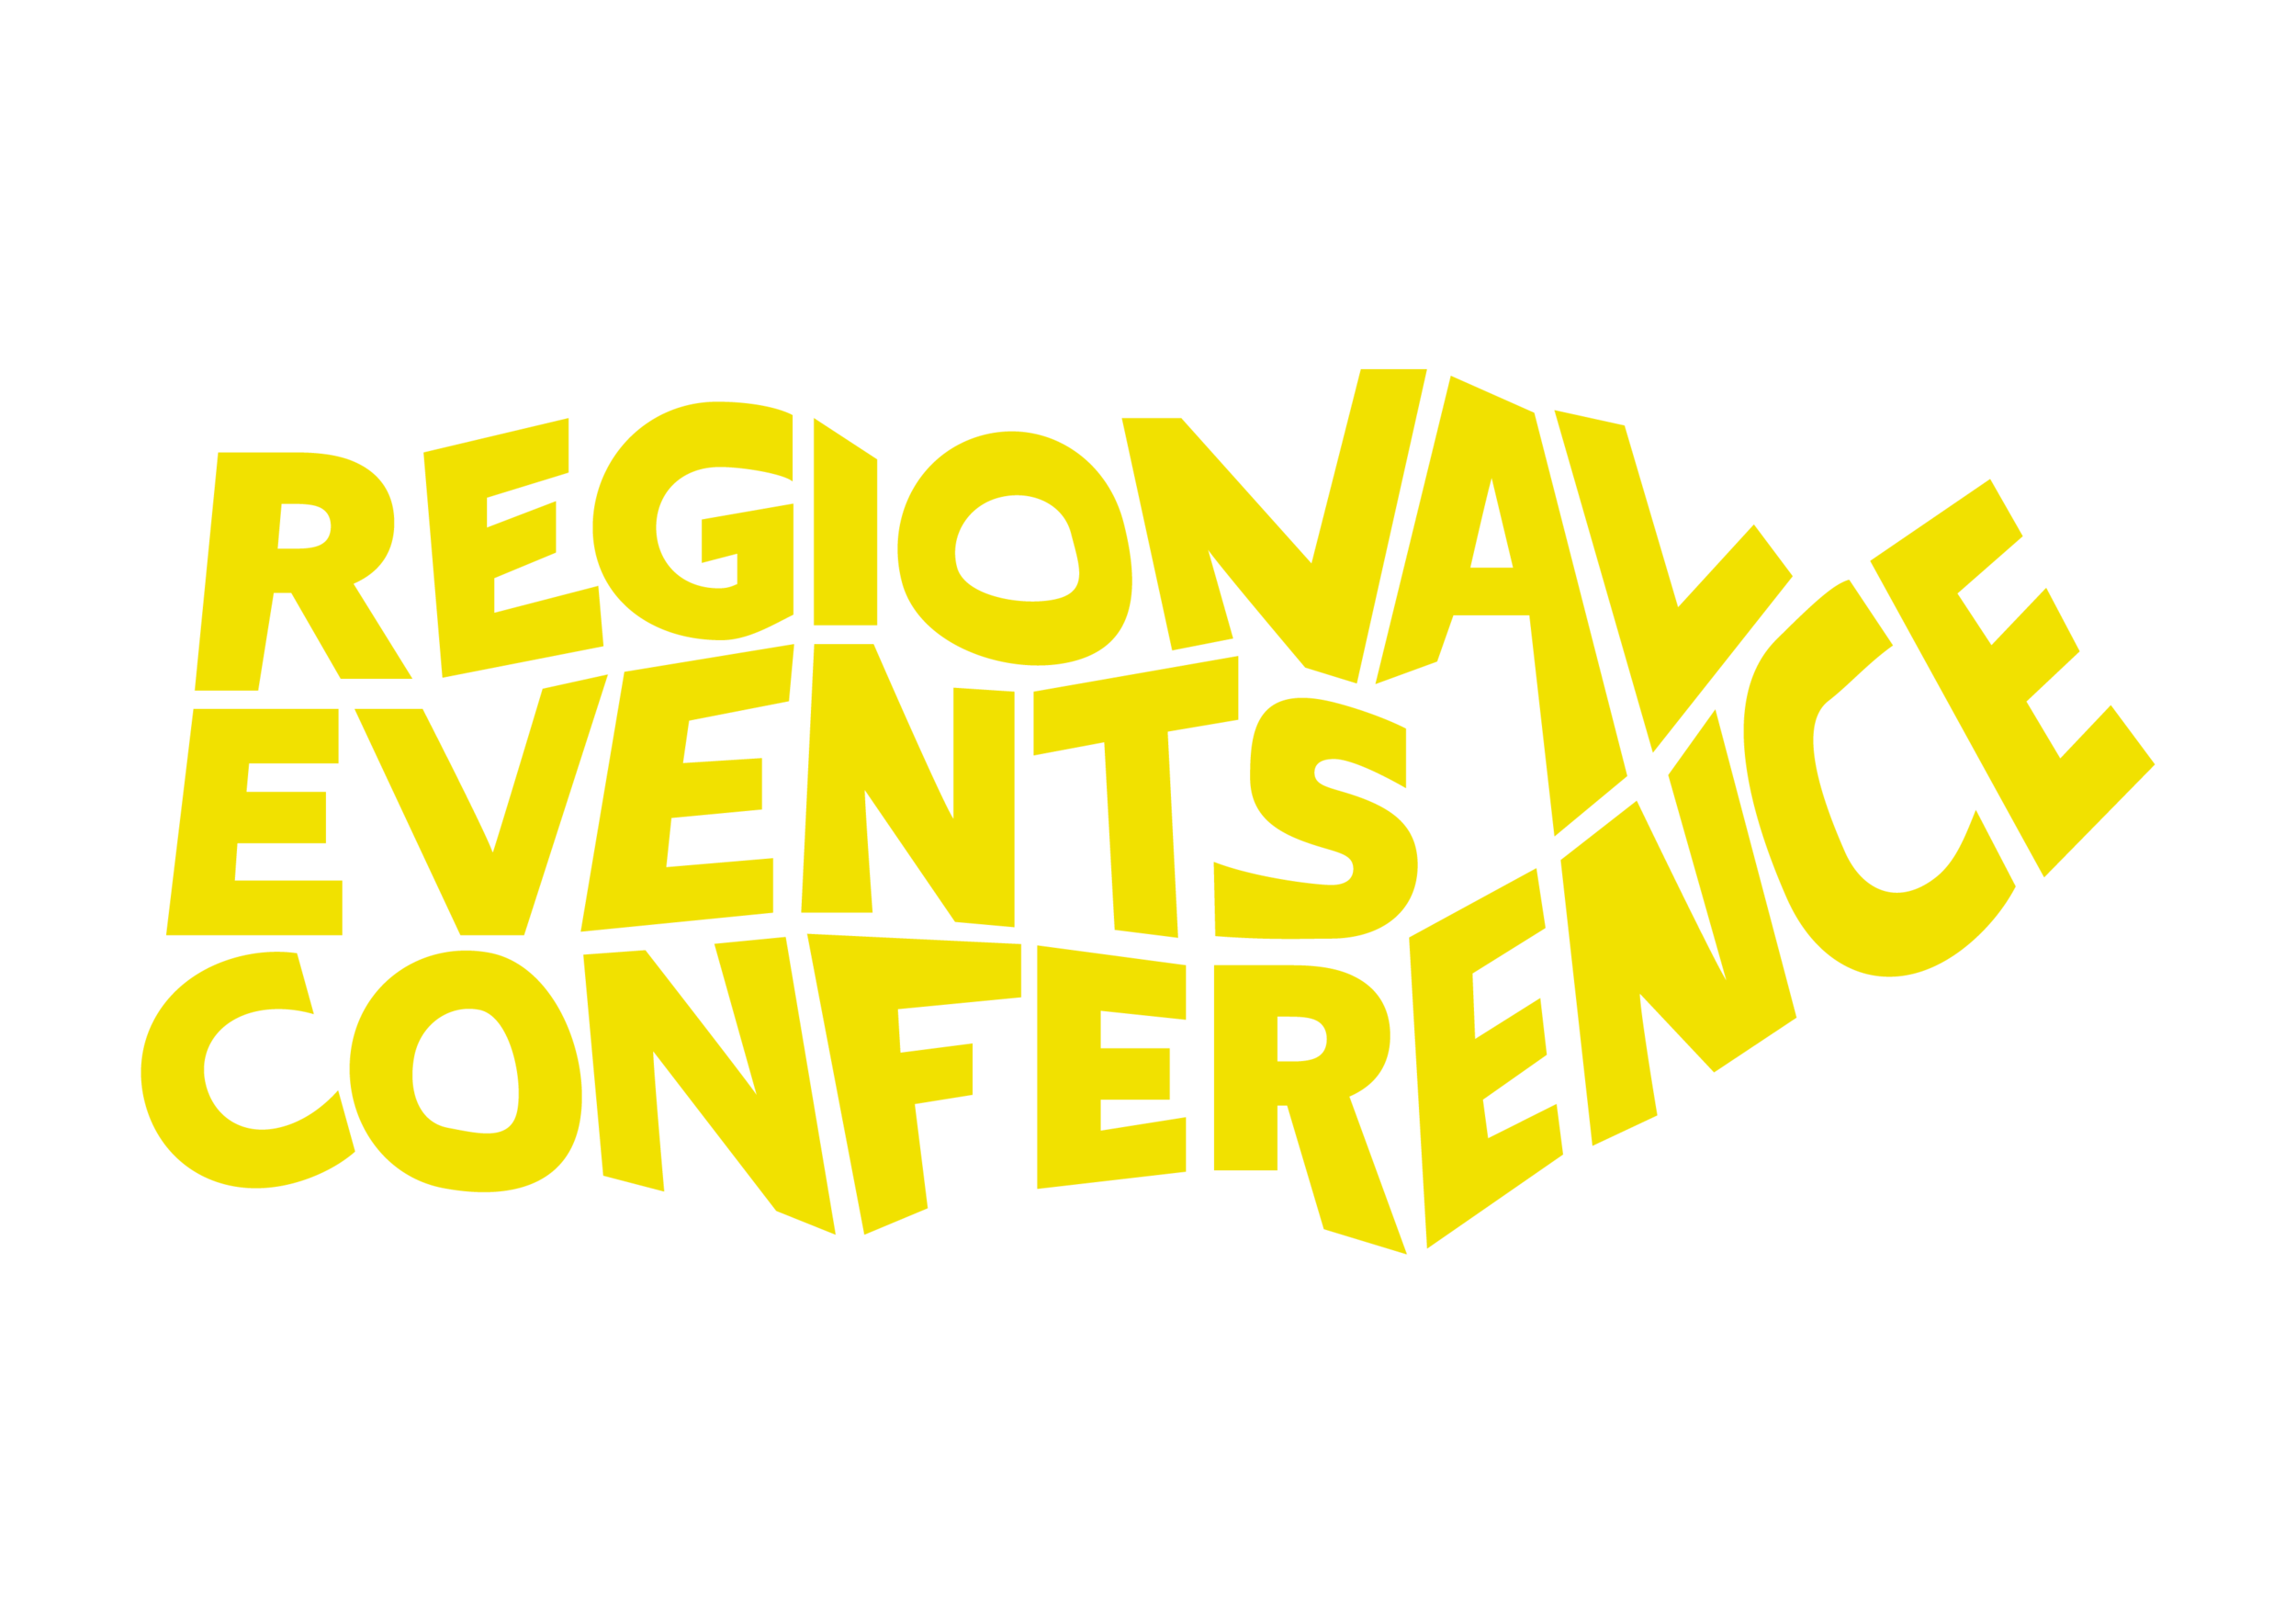 Regional Events Conference logo.png